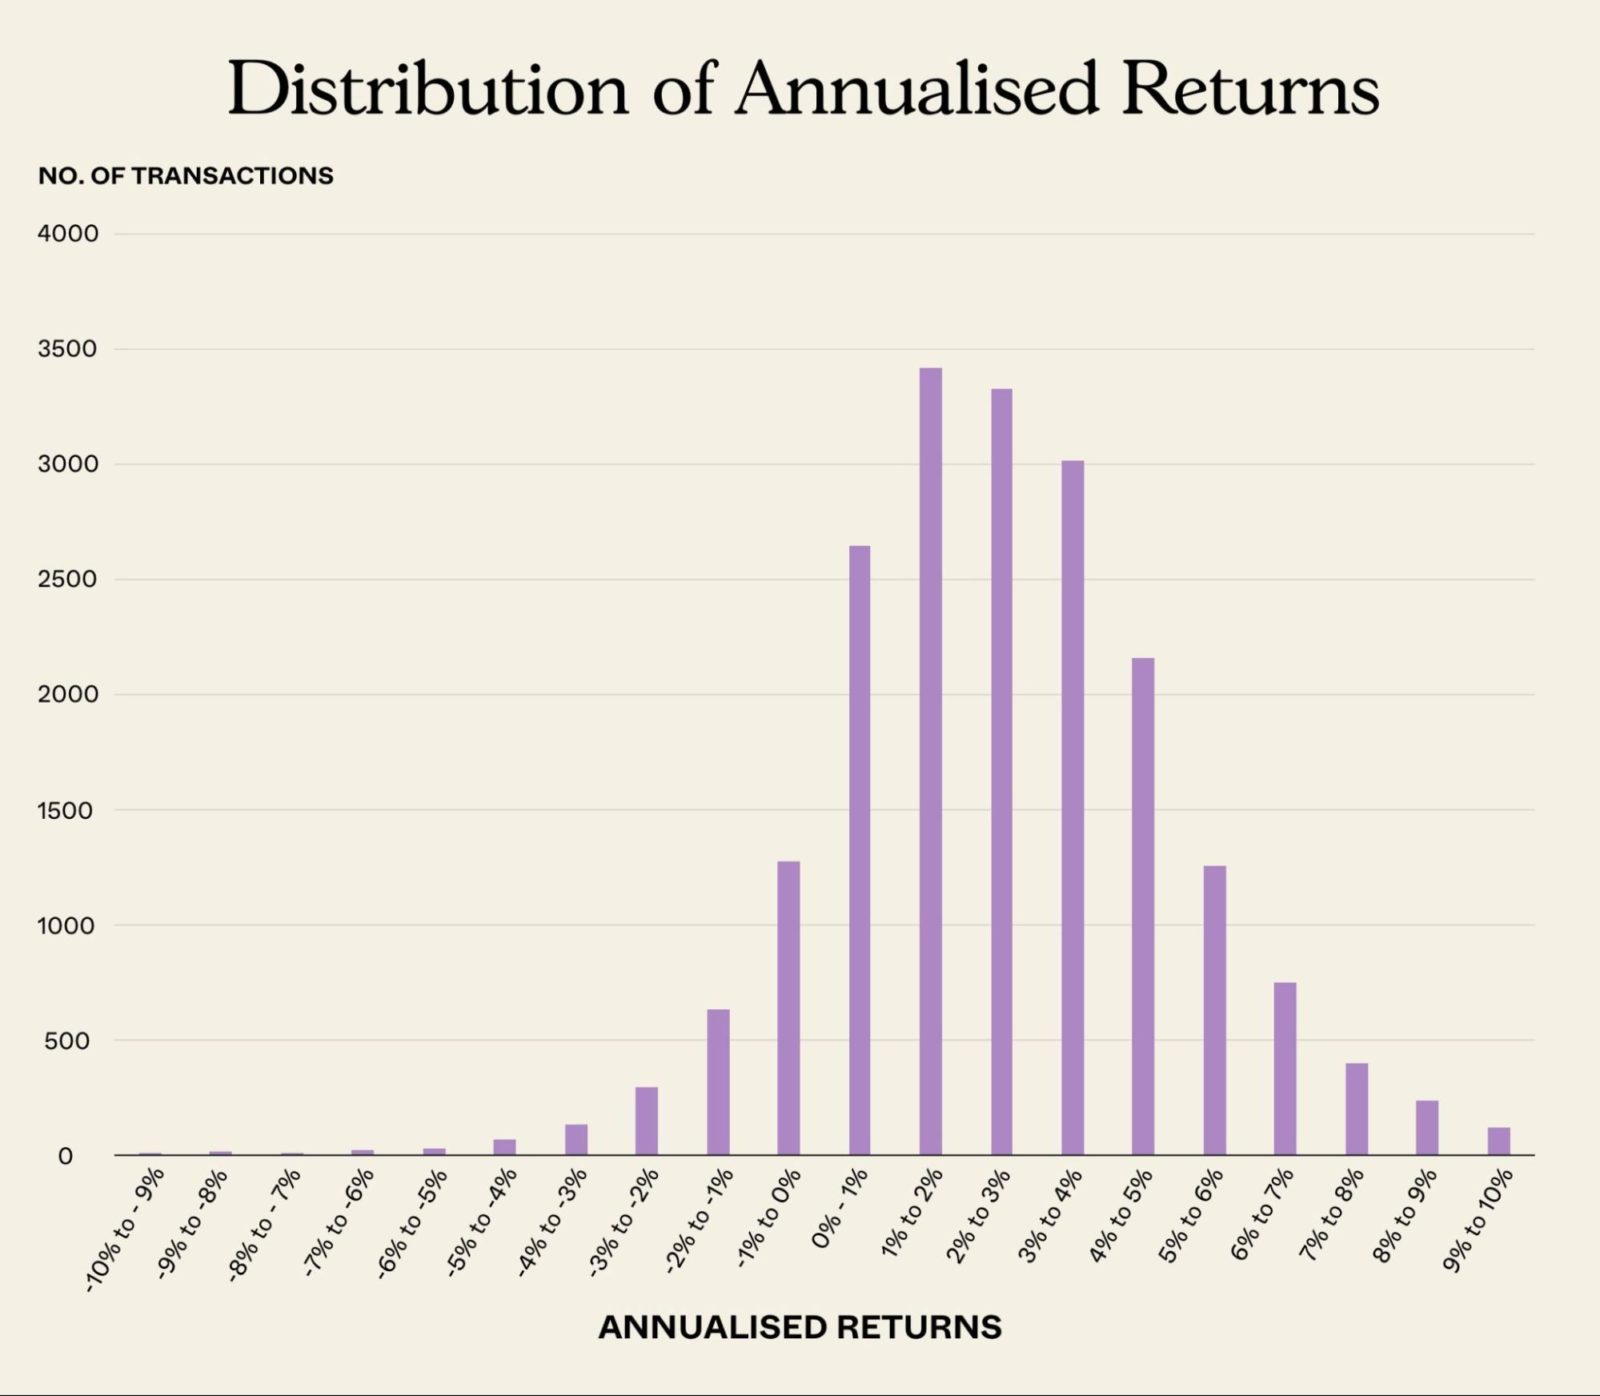 Distribution of Annualized Returns